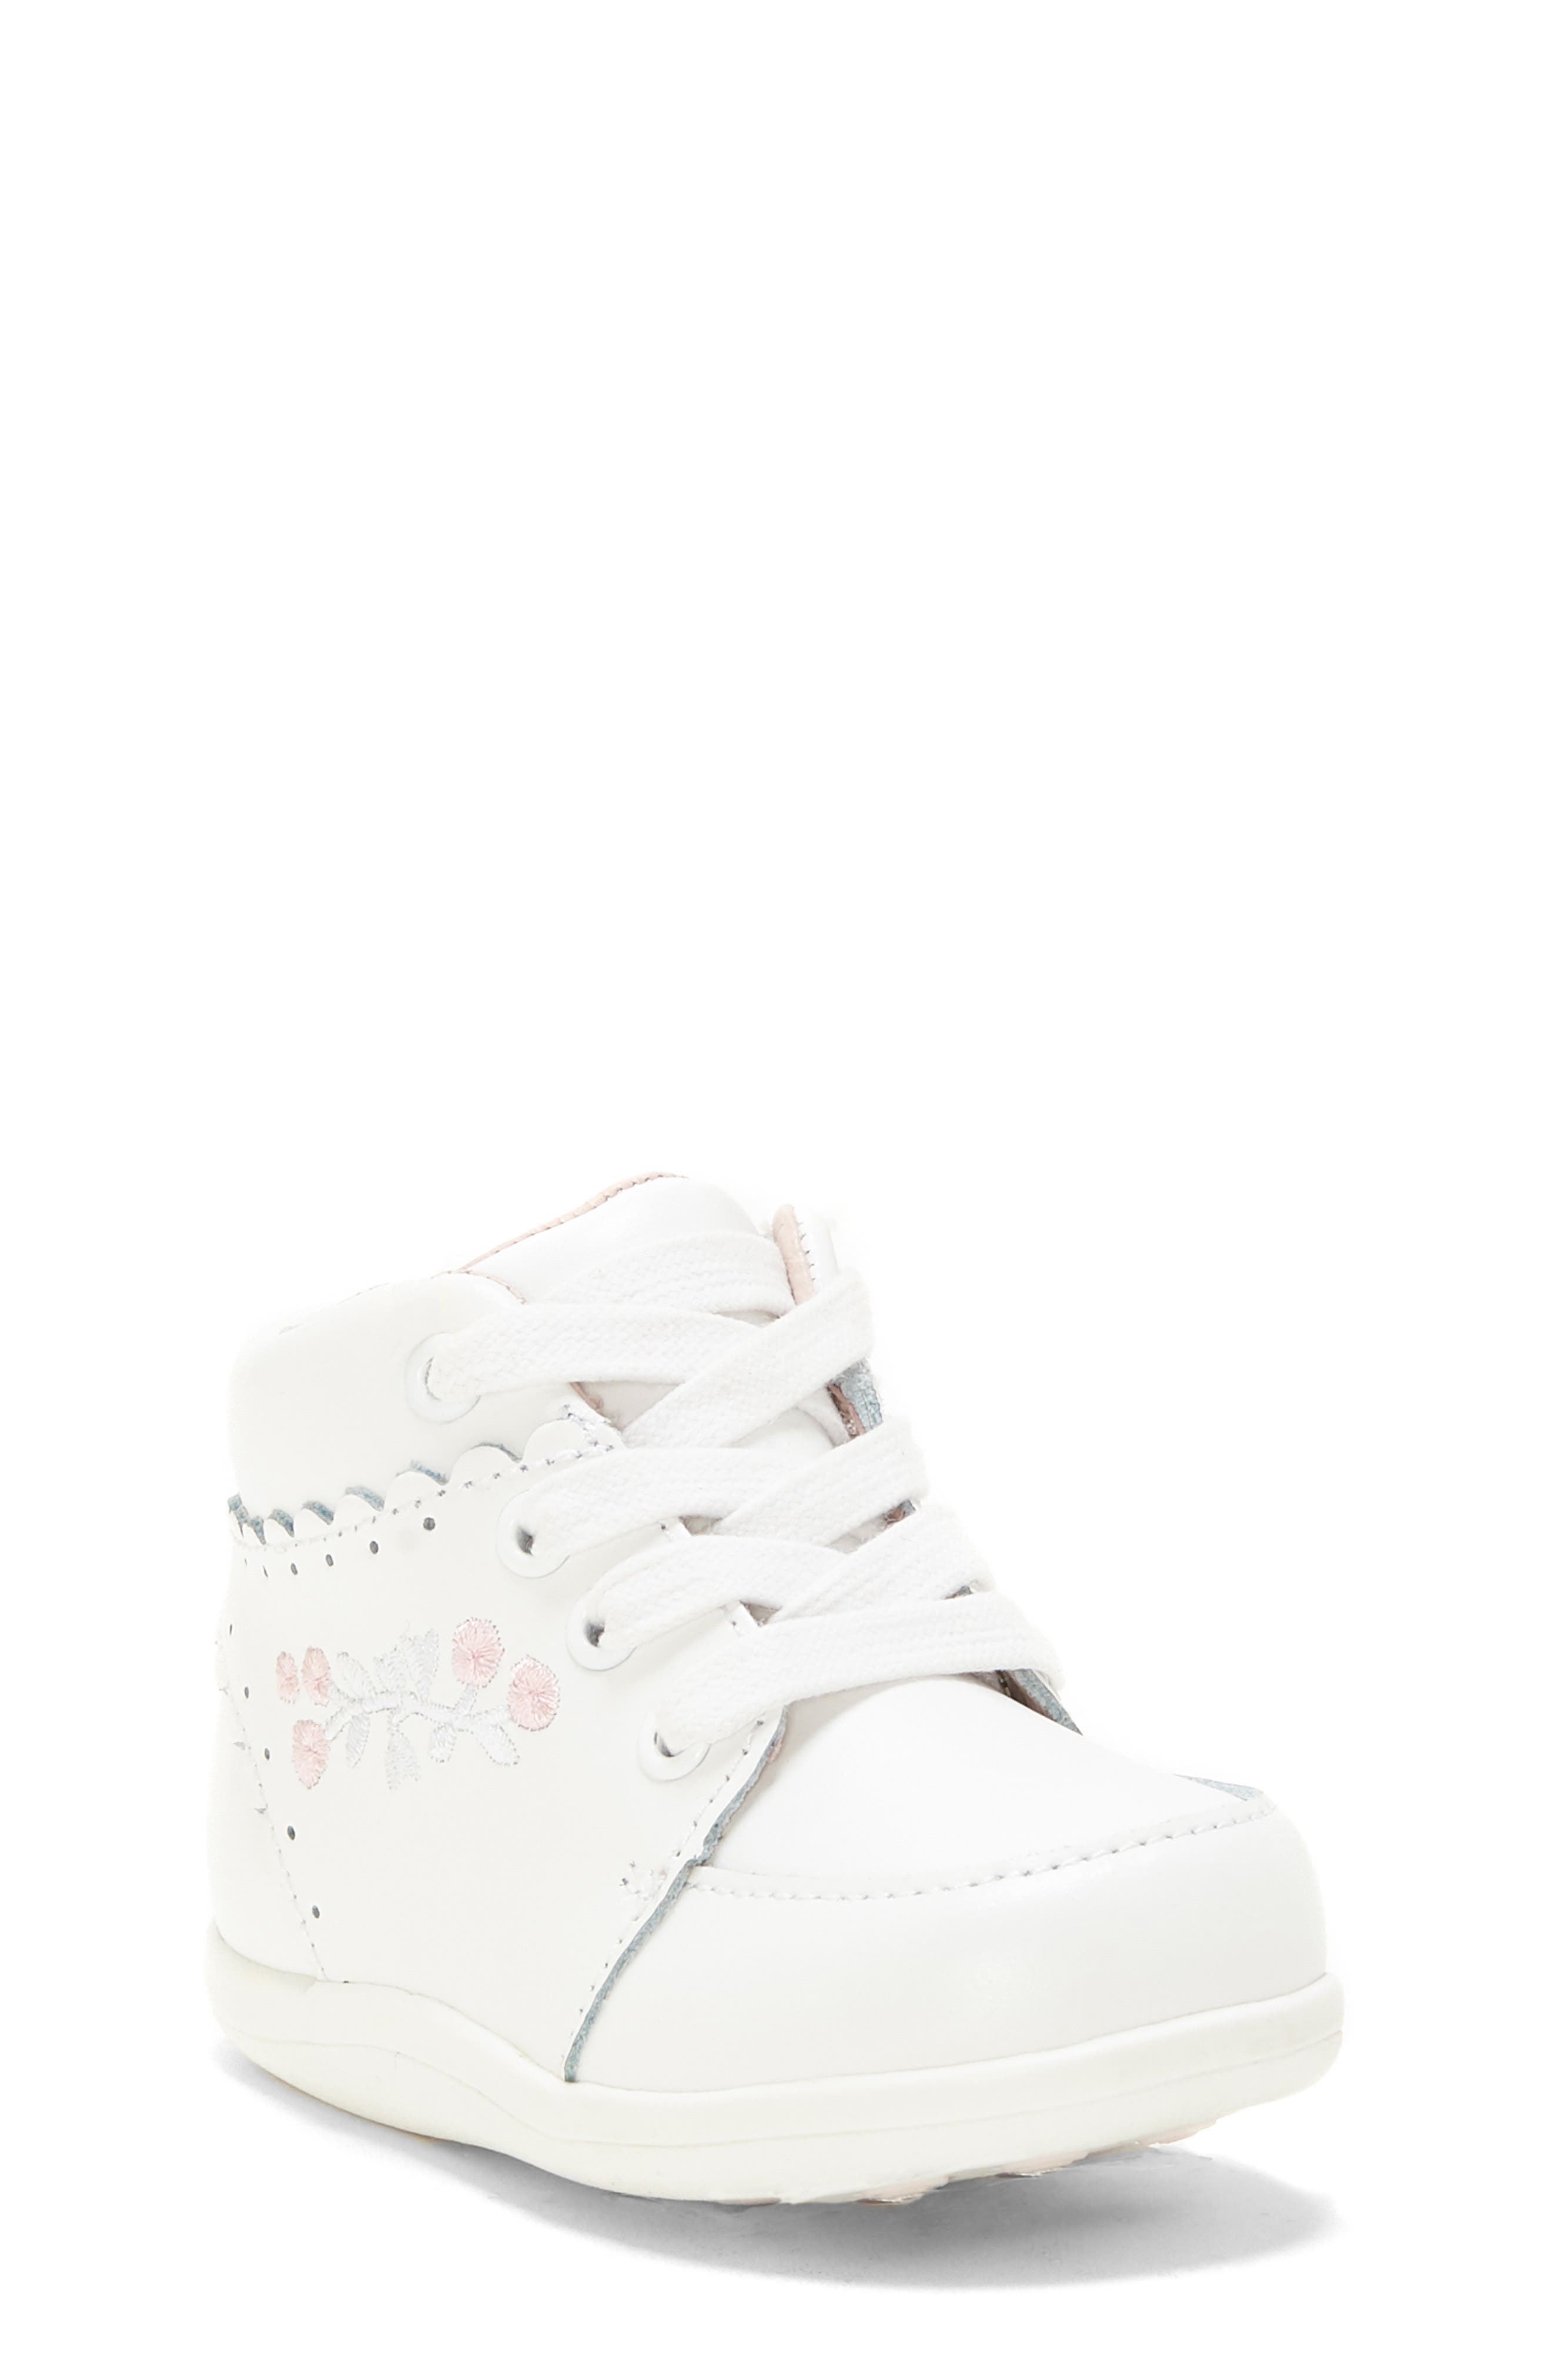 SOLE PLAY | Lucie Embroidered Sneaker 